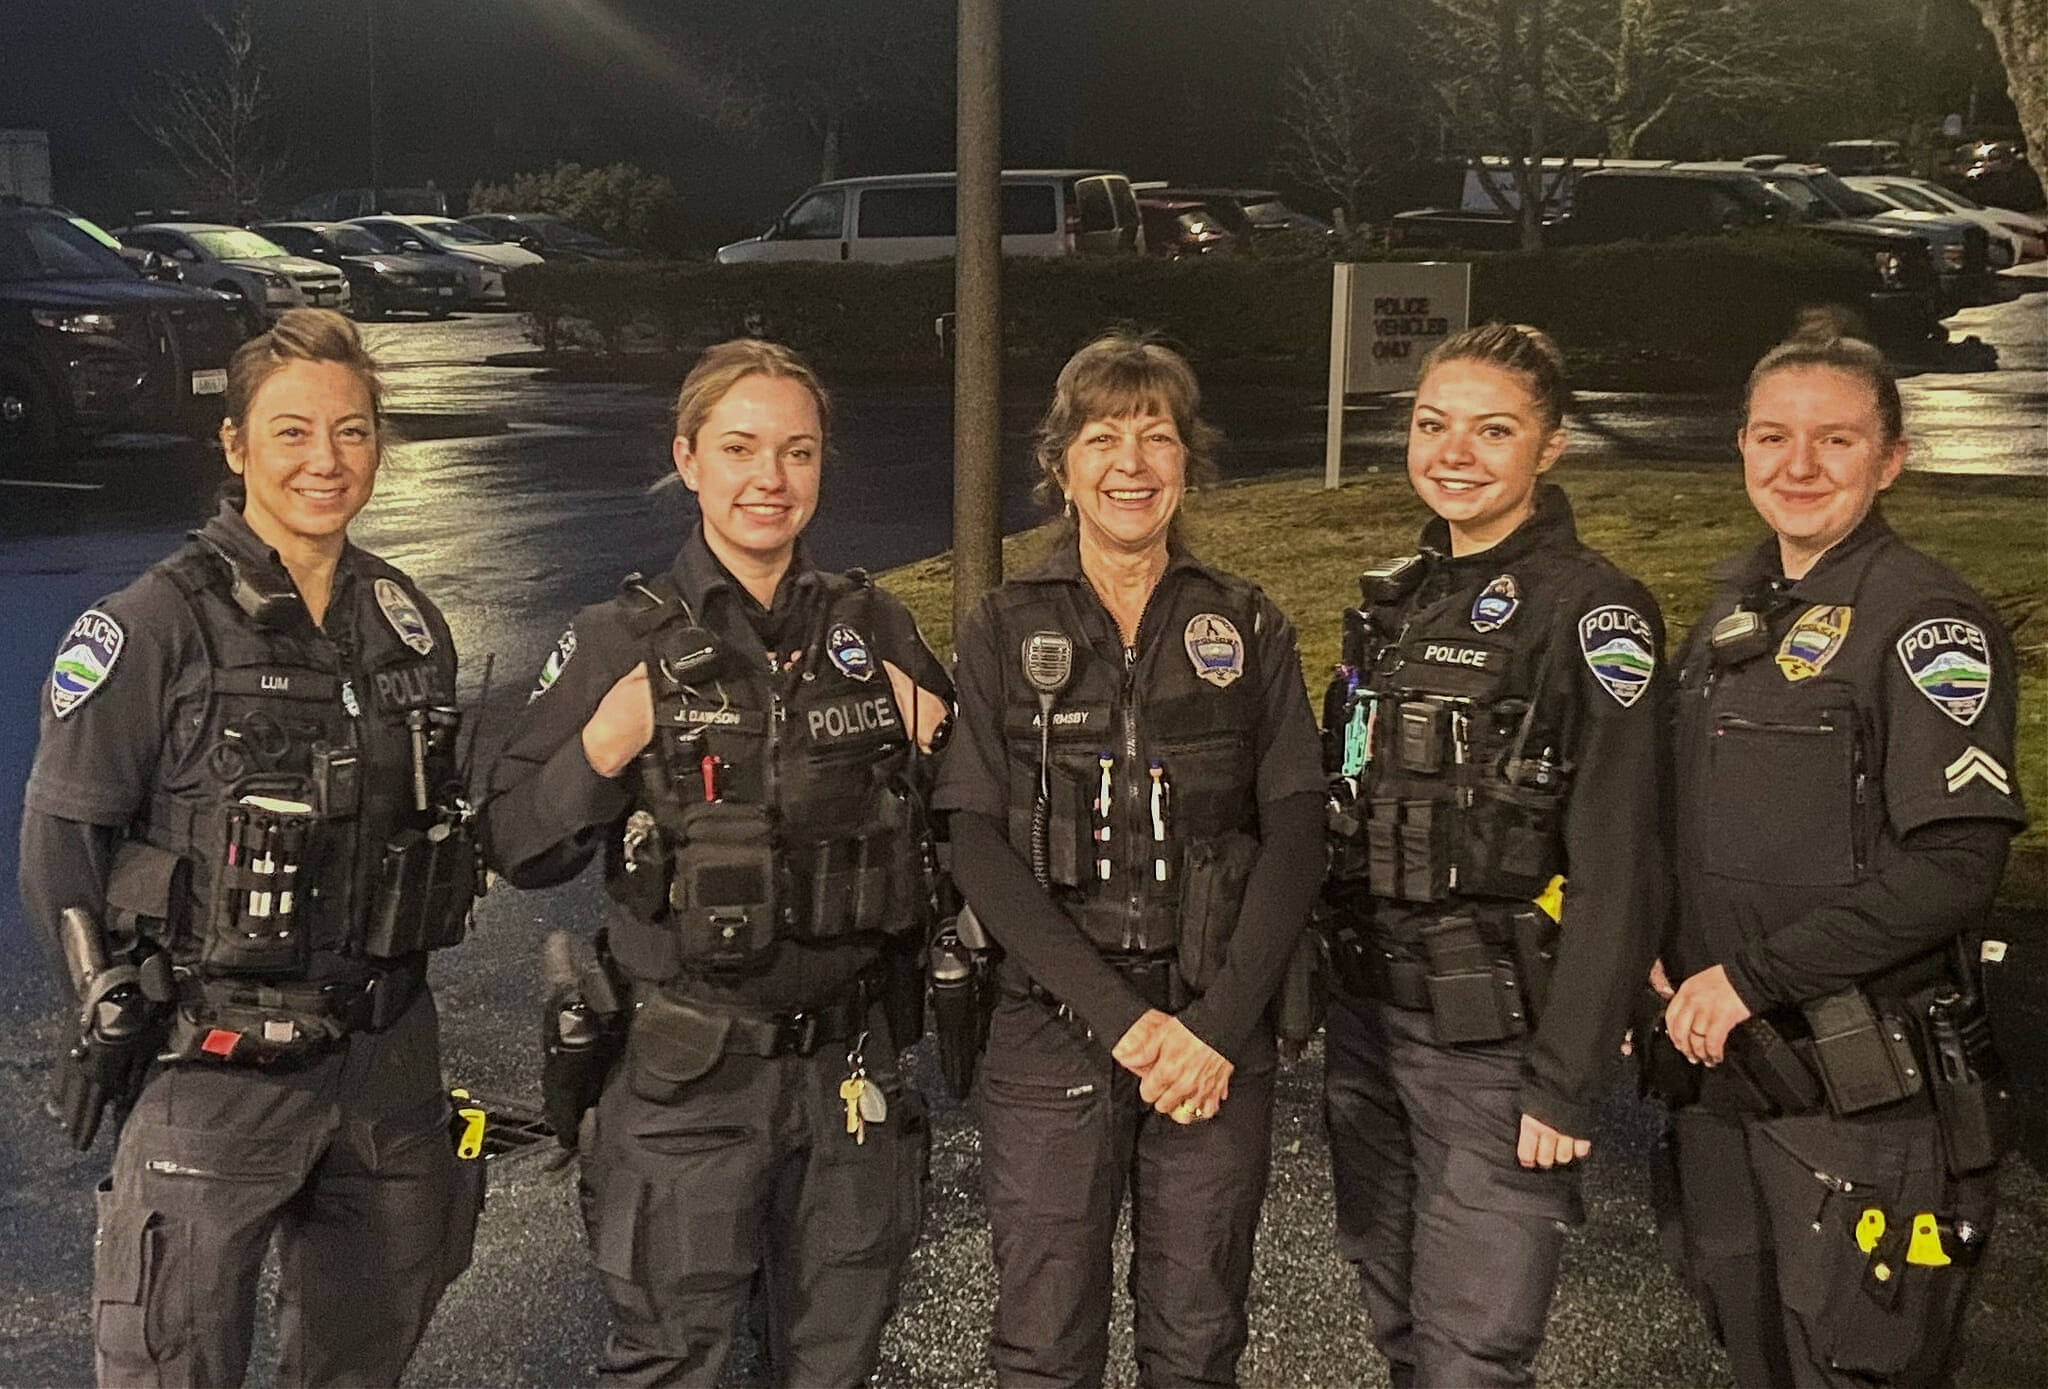 MIPD highlights officers during Women's History Month